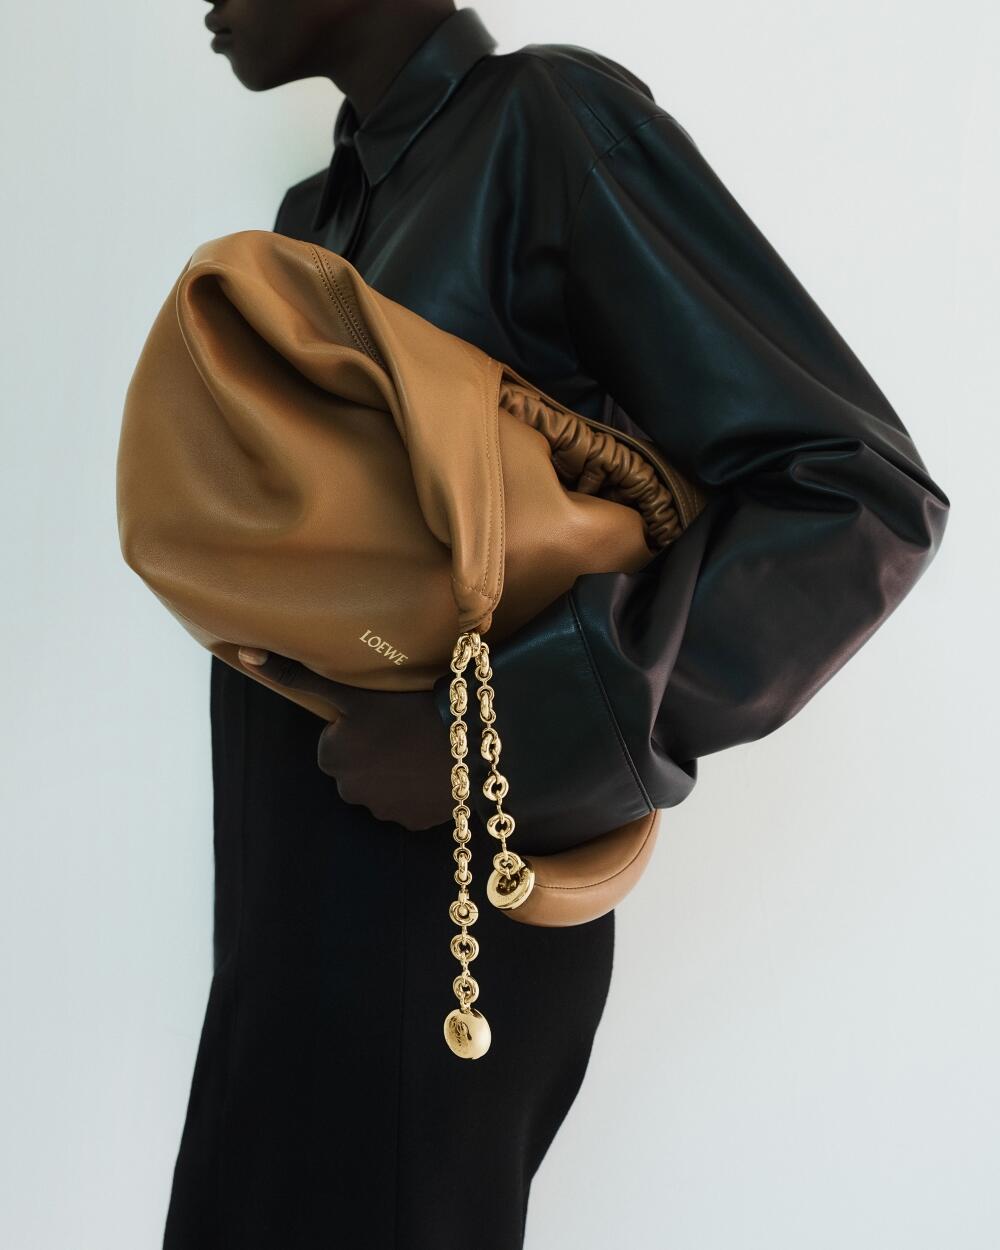 LOEWE unveils the Squeeze: A quirky, luxurious statement bag for FW23